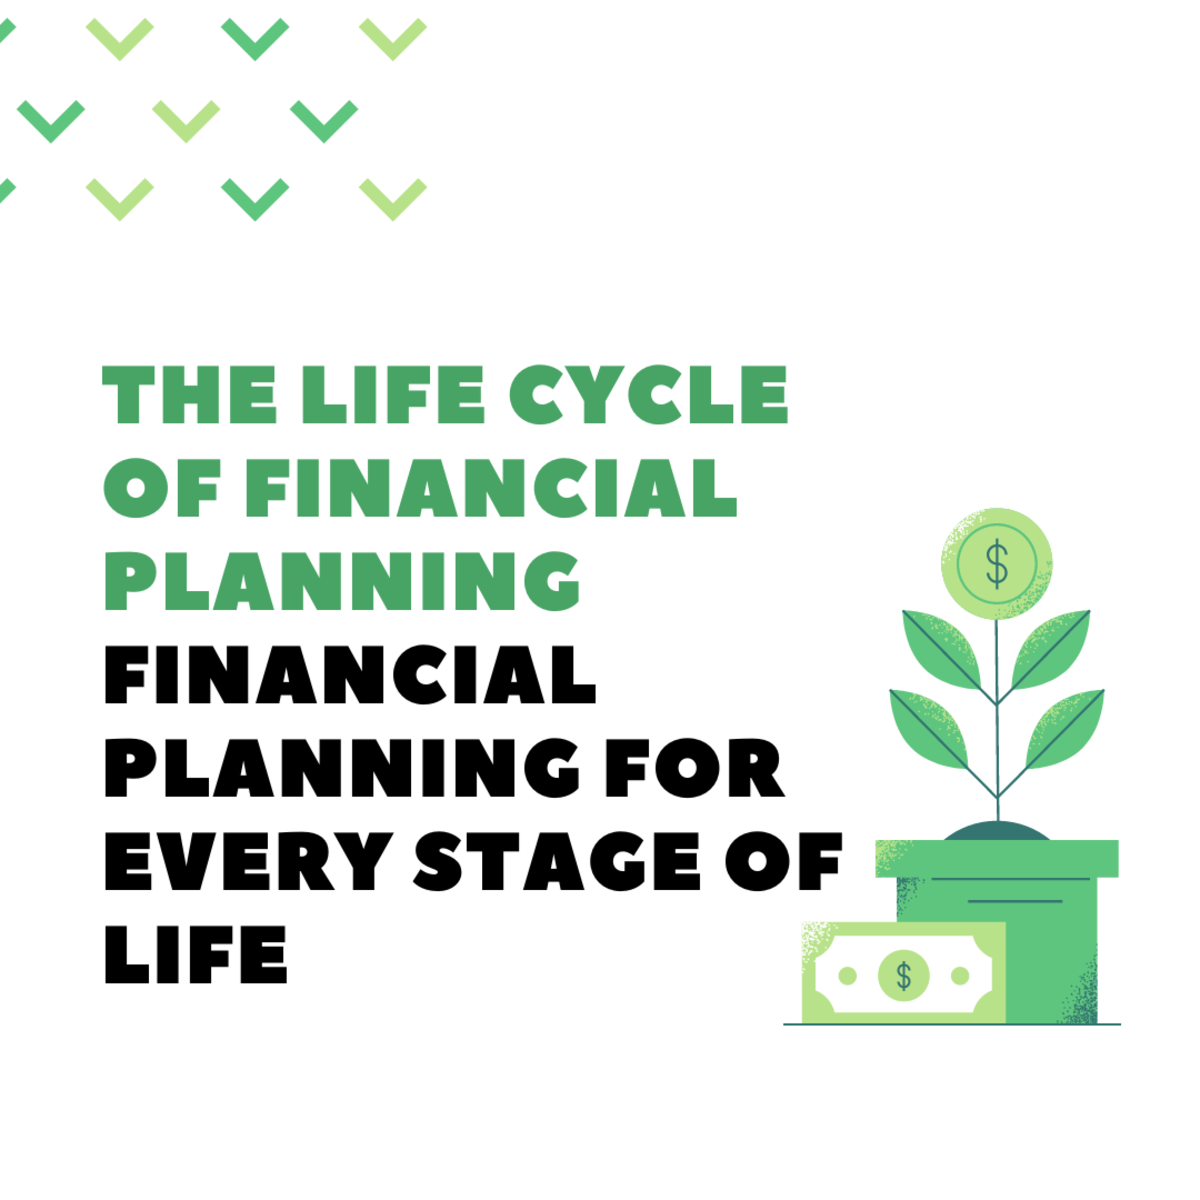 The Life Cycle of Financial Planning: Financial Planning for Every Stage of Life